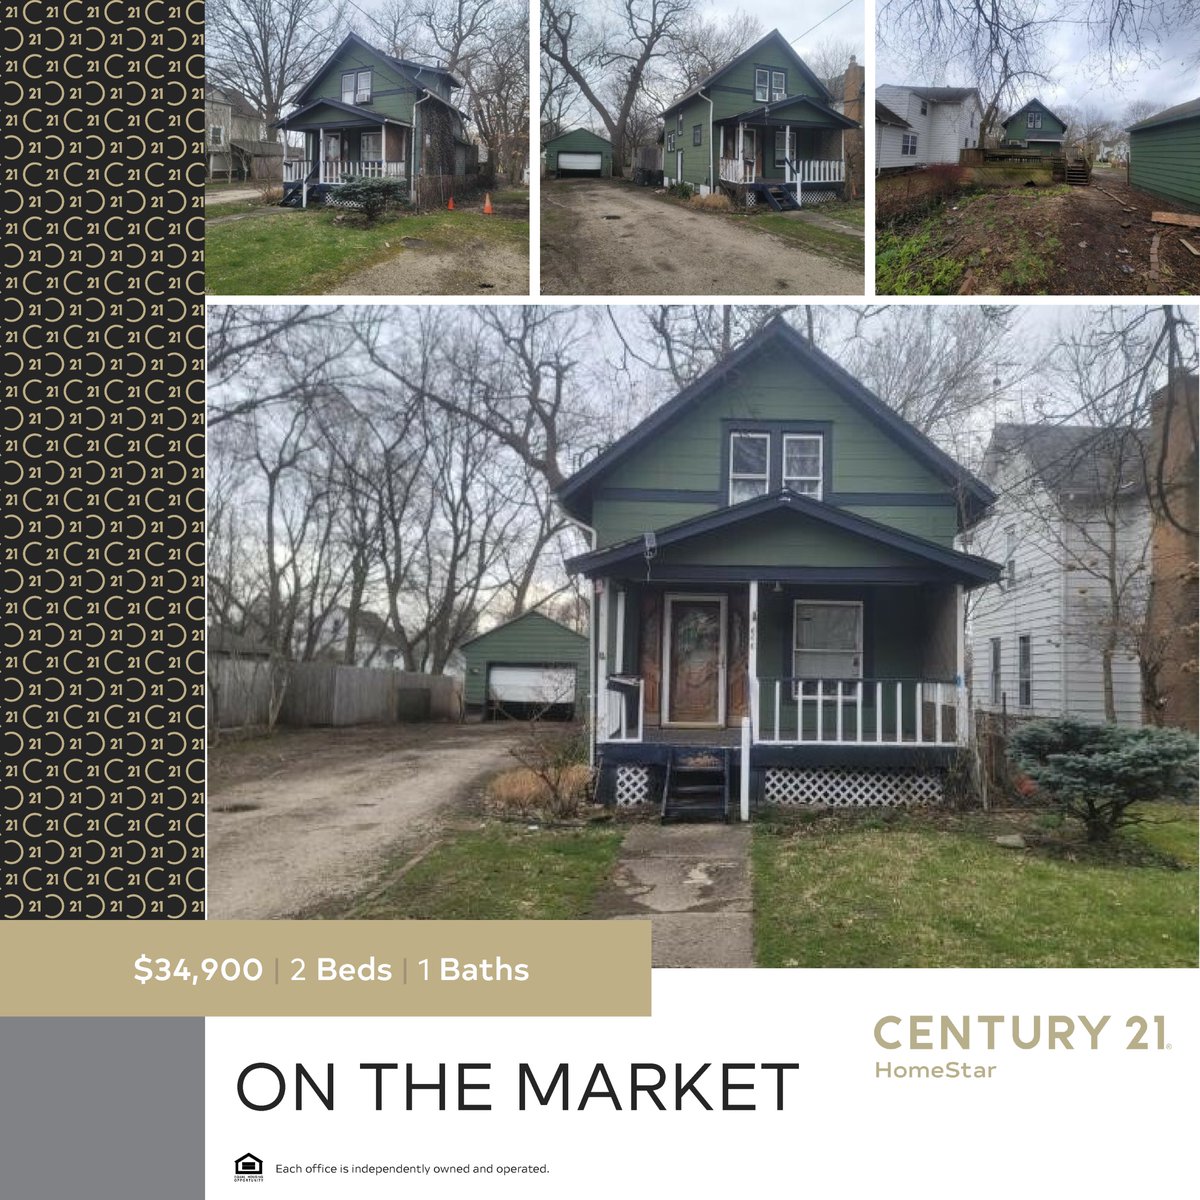 New listing in Akron!  Great investment opportunity.  It has 2 bedrooms and 1 bathroom.  Fenced in backyard. 

#newlisting #investmentproperty #investment #homeforsale #listingagent #sellersagent #realestateagent #investor #letUsBringYouHome